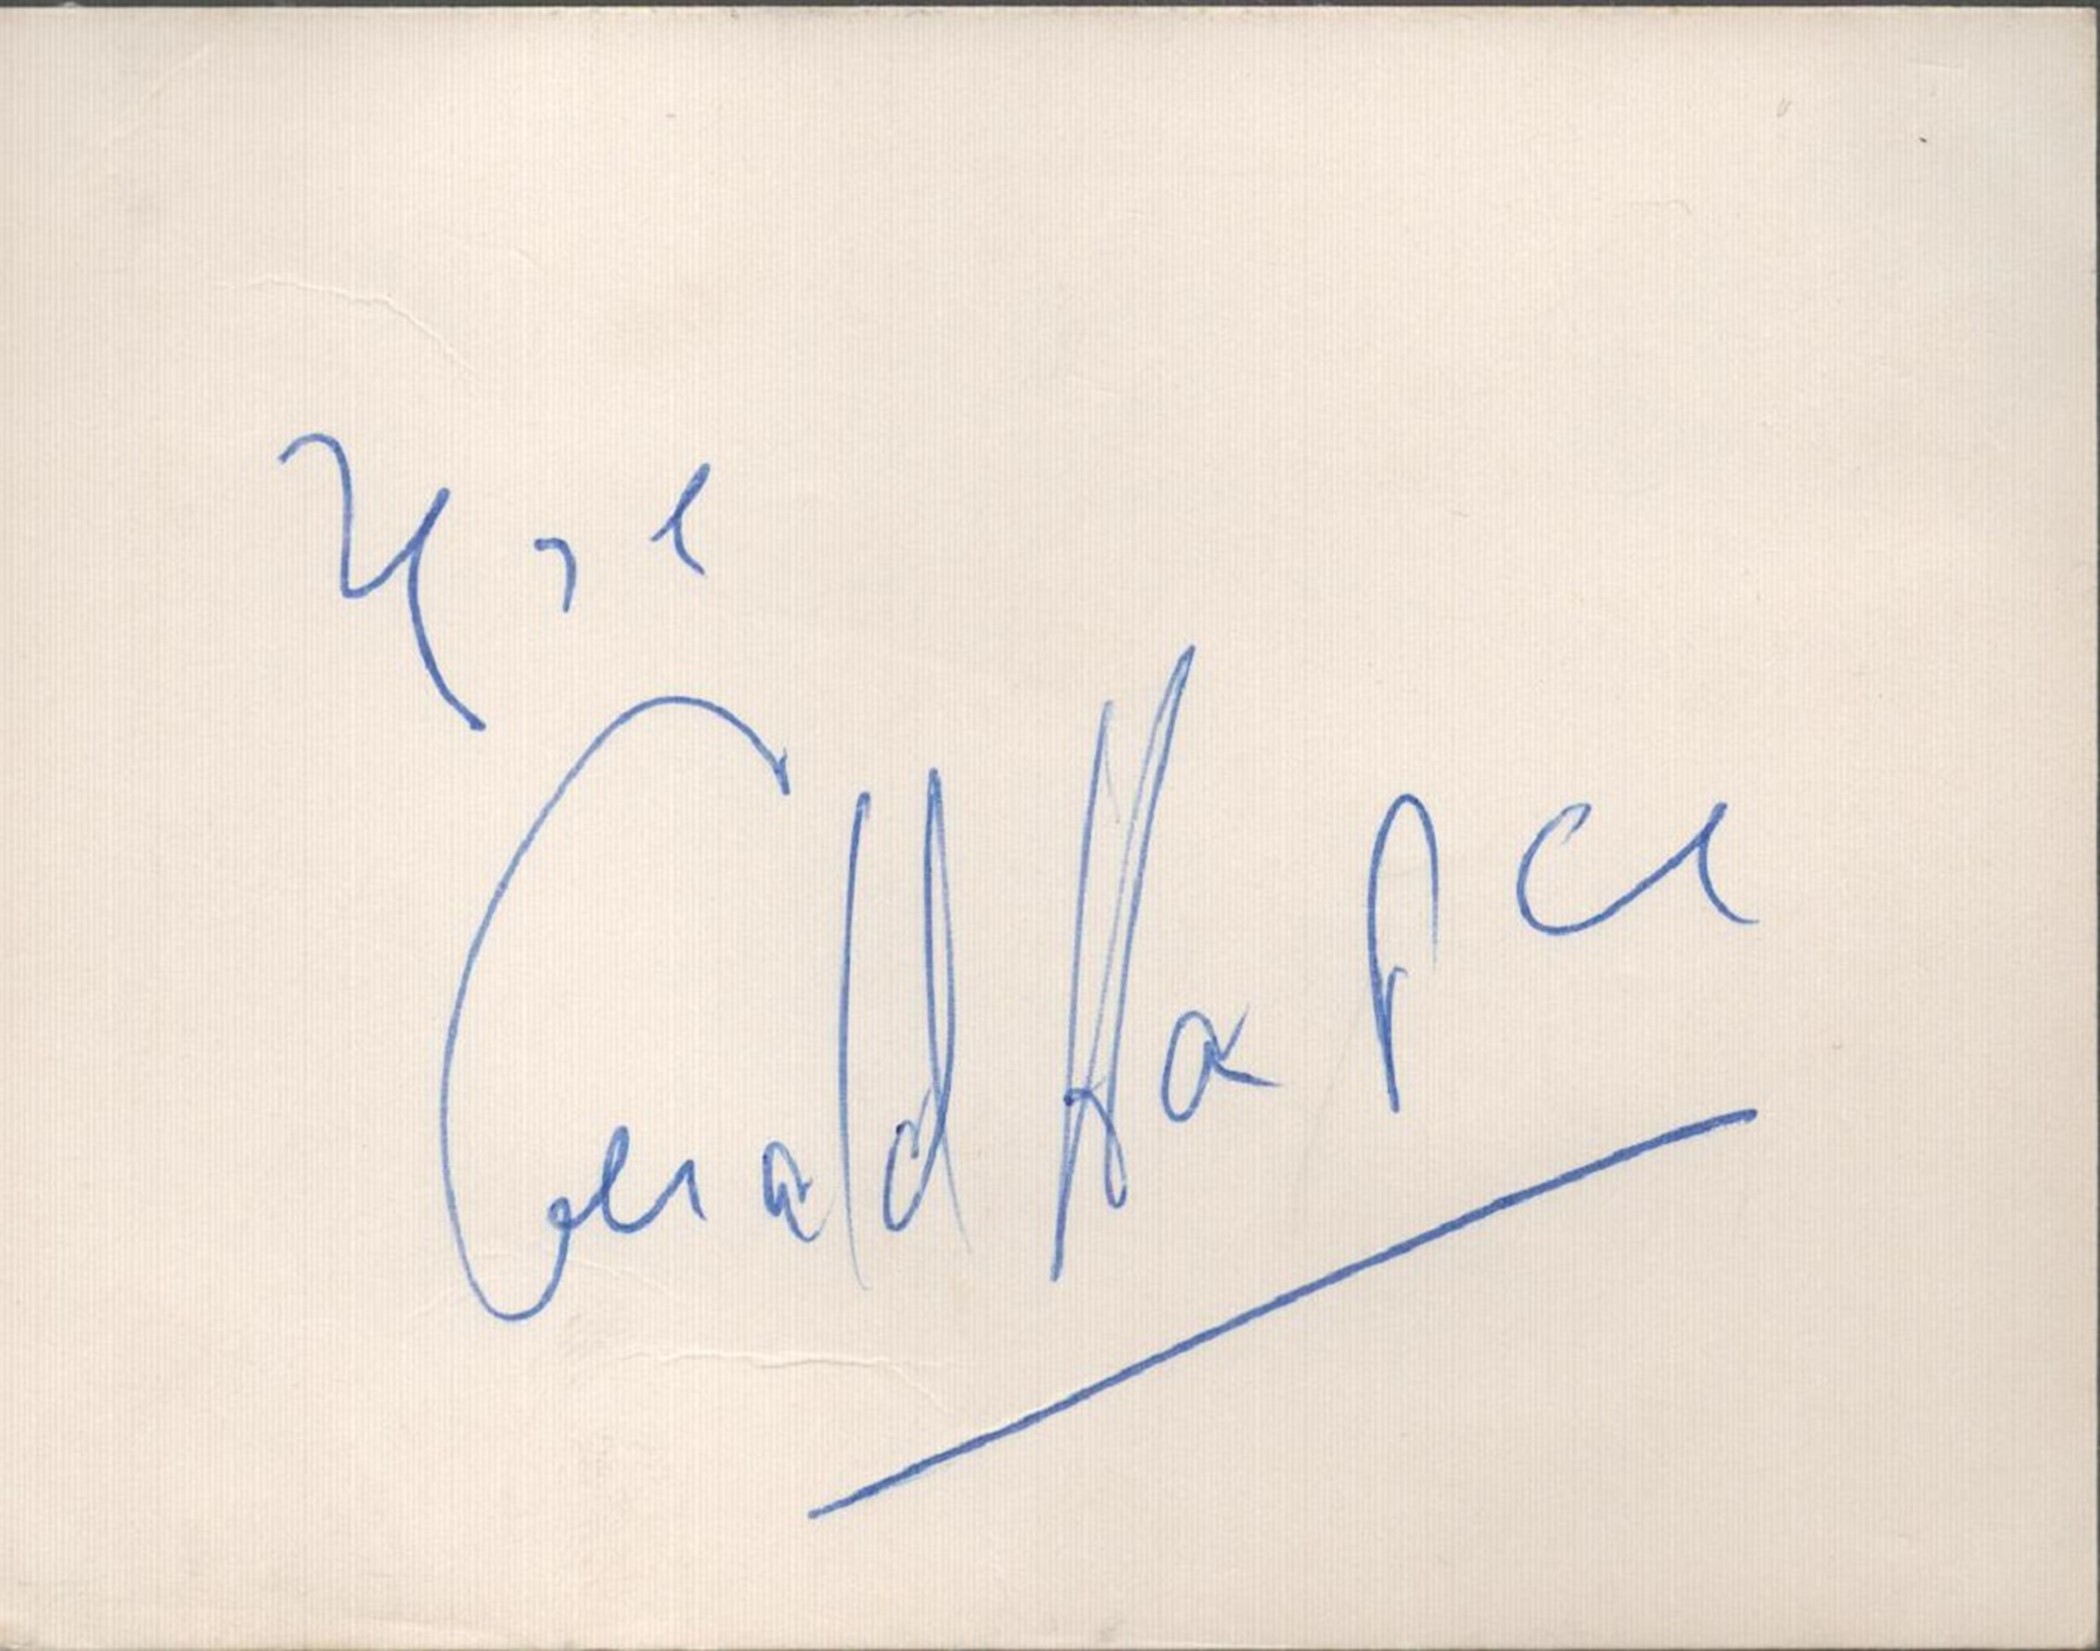 English Actor Gerald Harper Signed 4x3 inch White Autograph Card. Signed in blue ink. Good